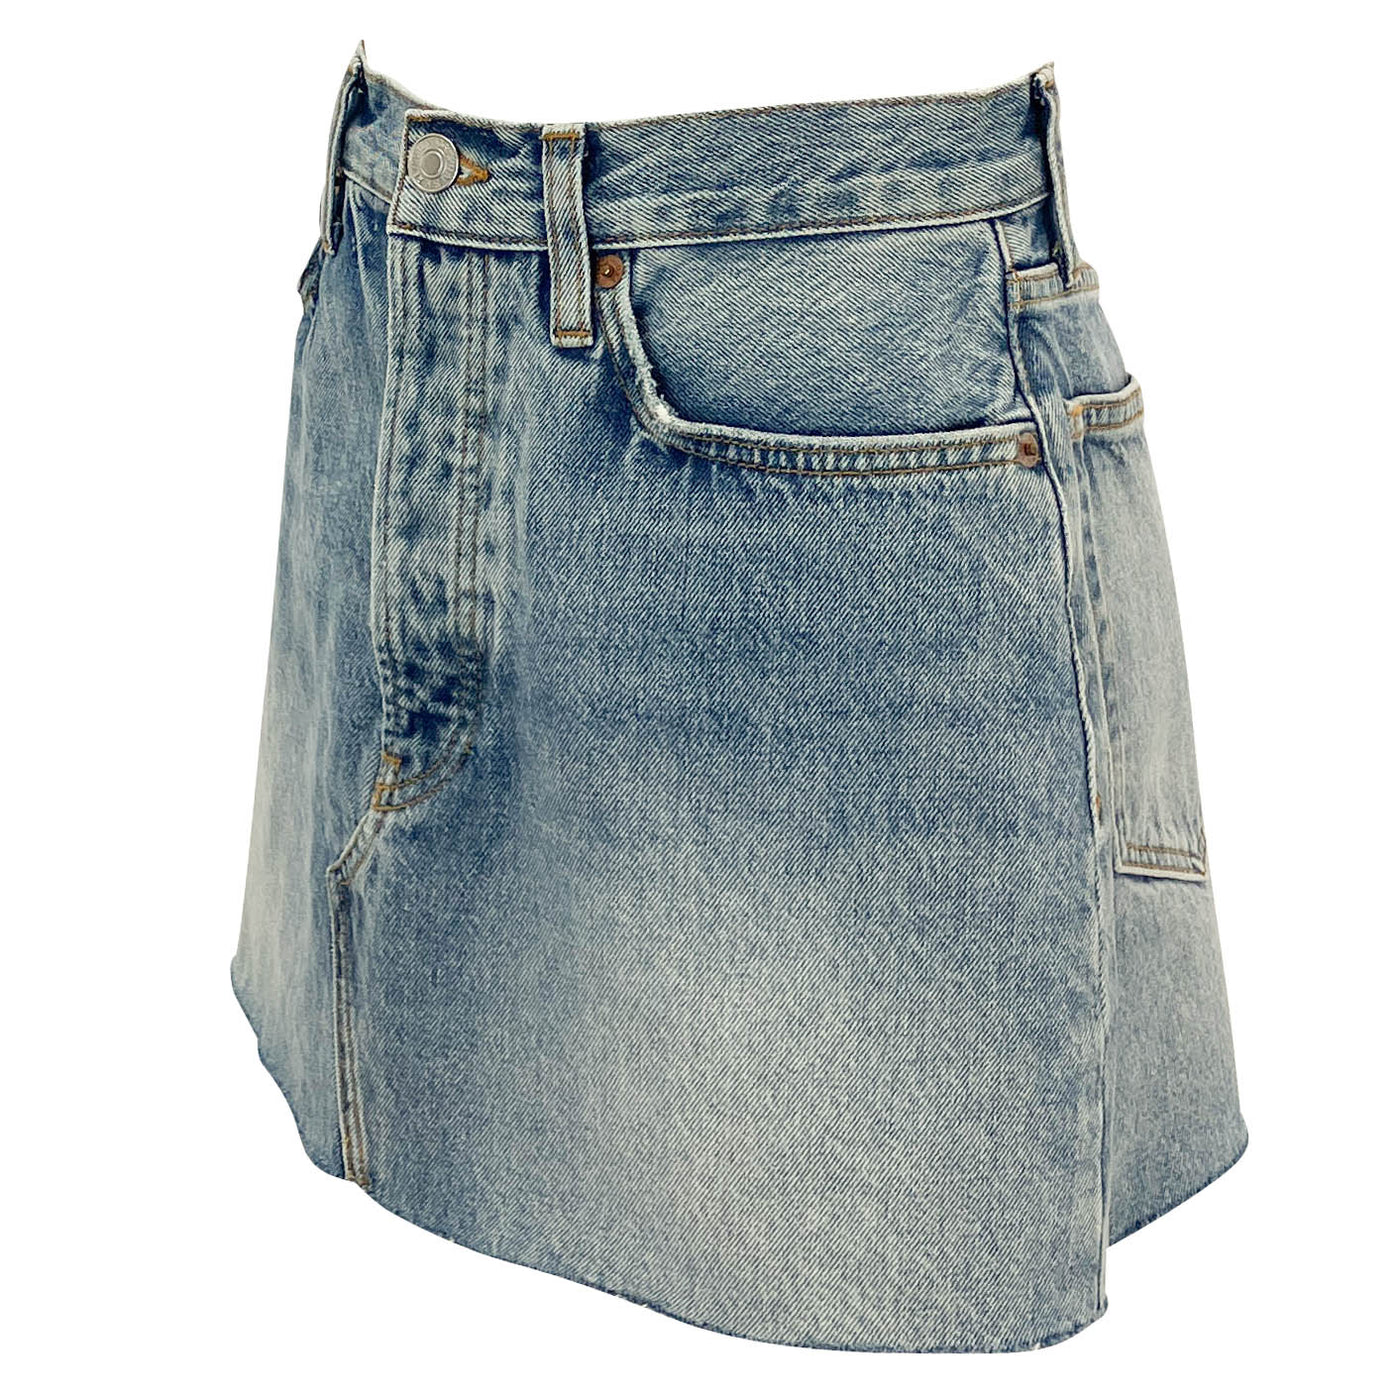 RE/DONE 90's Mini Skirt in Faded Blues - Discounts on RE/DONE at UAL